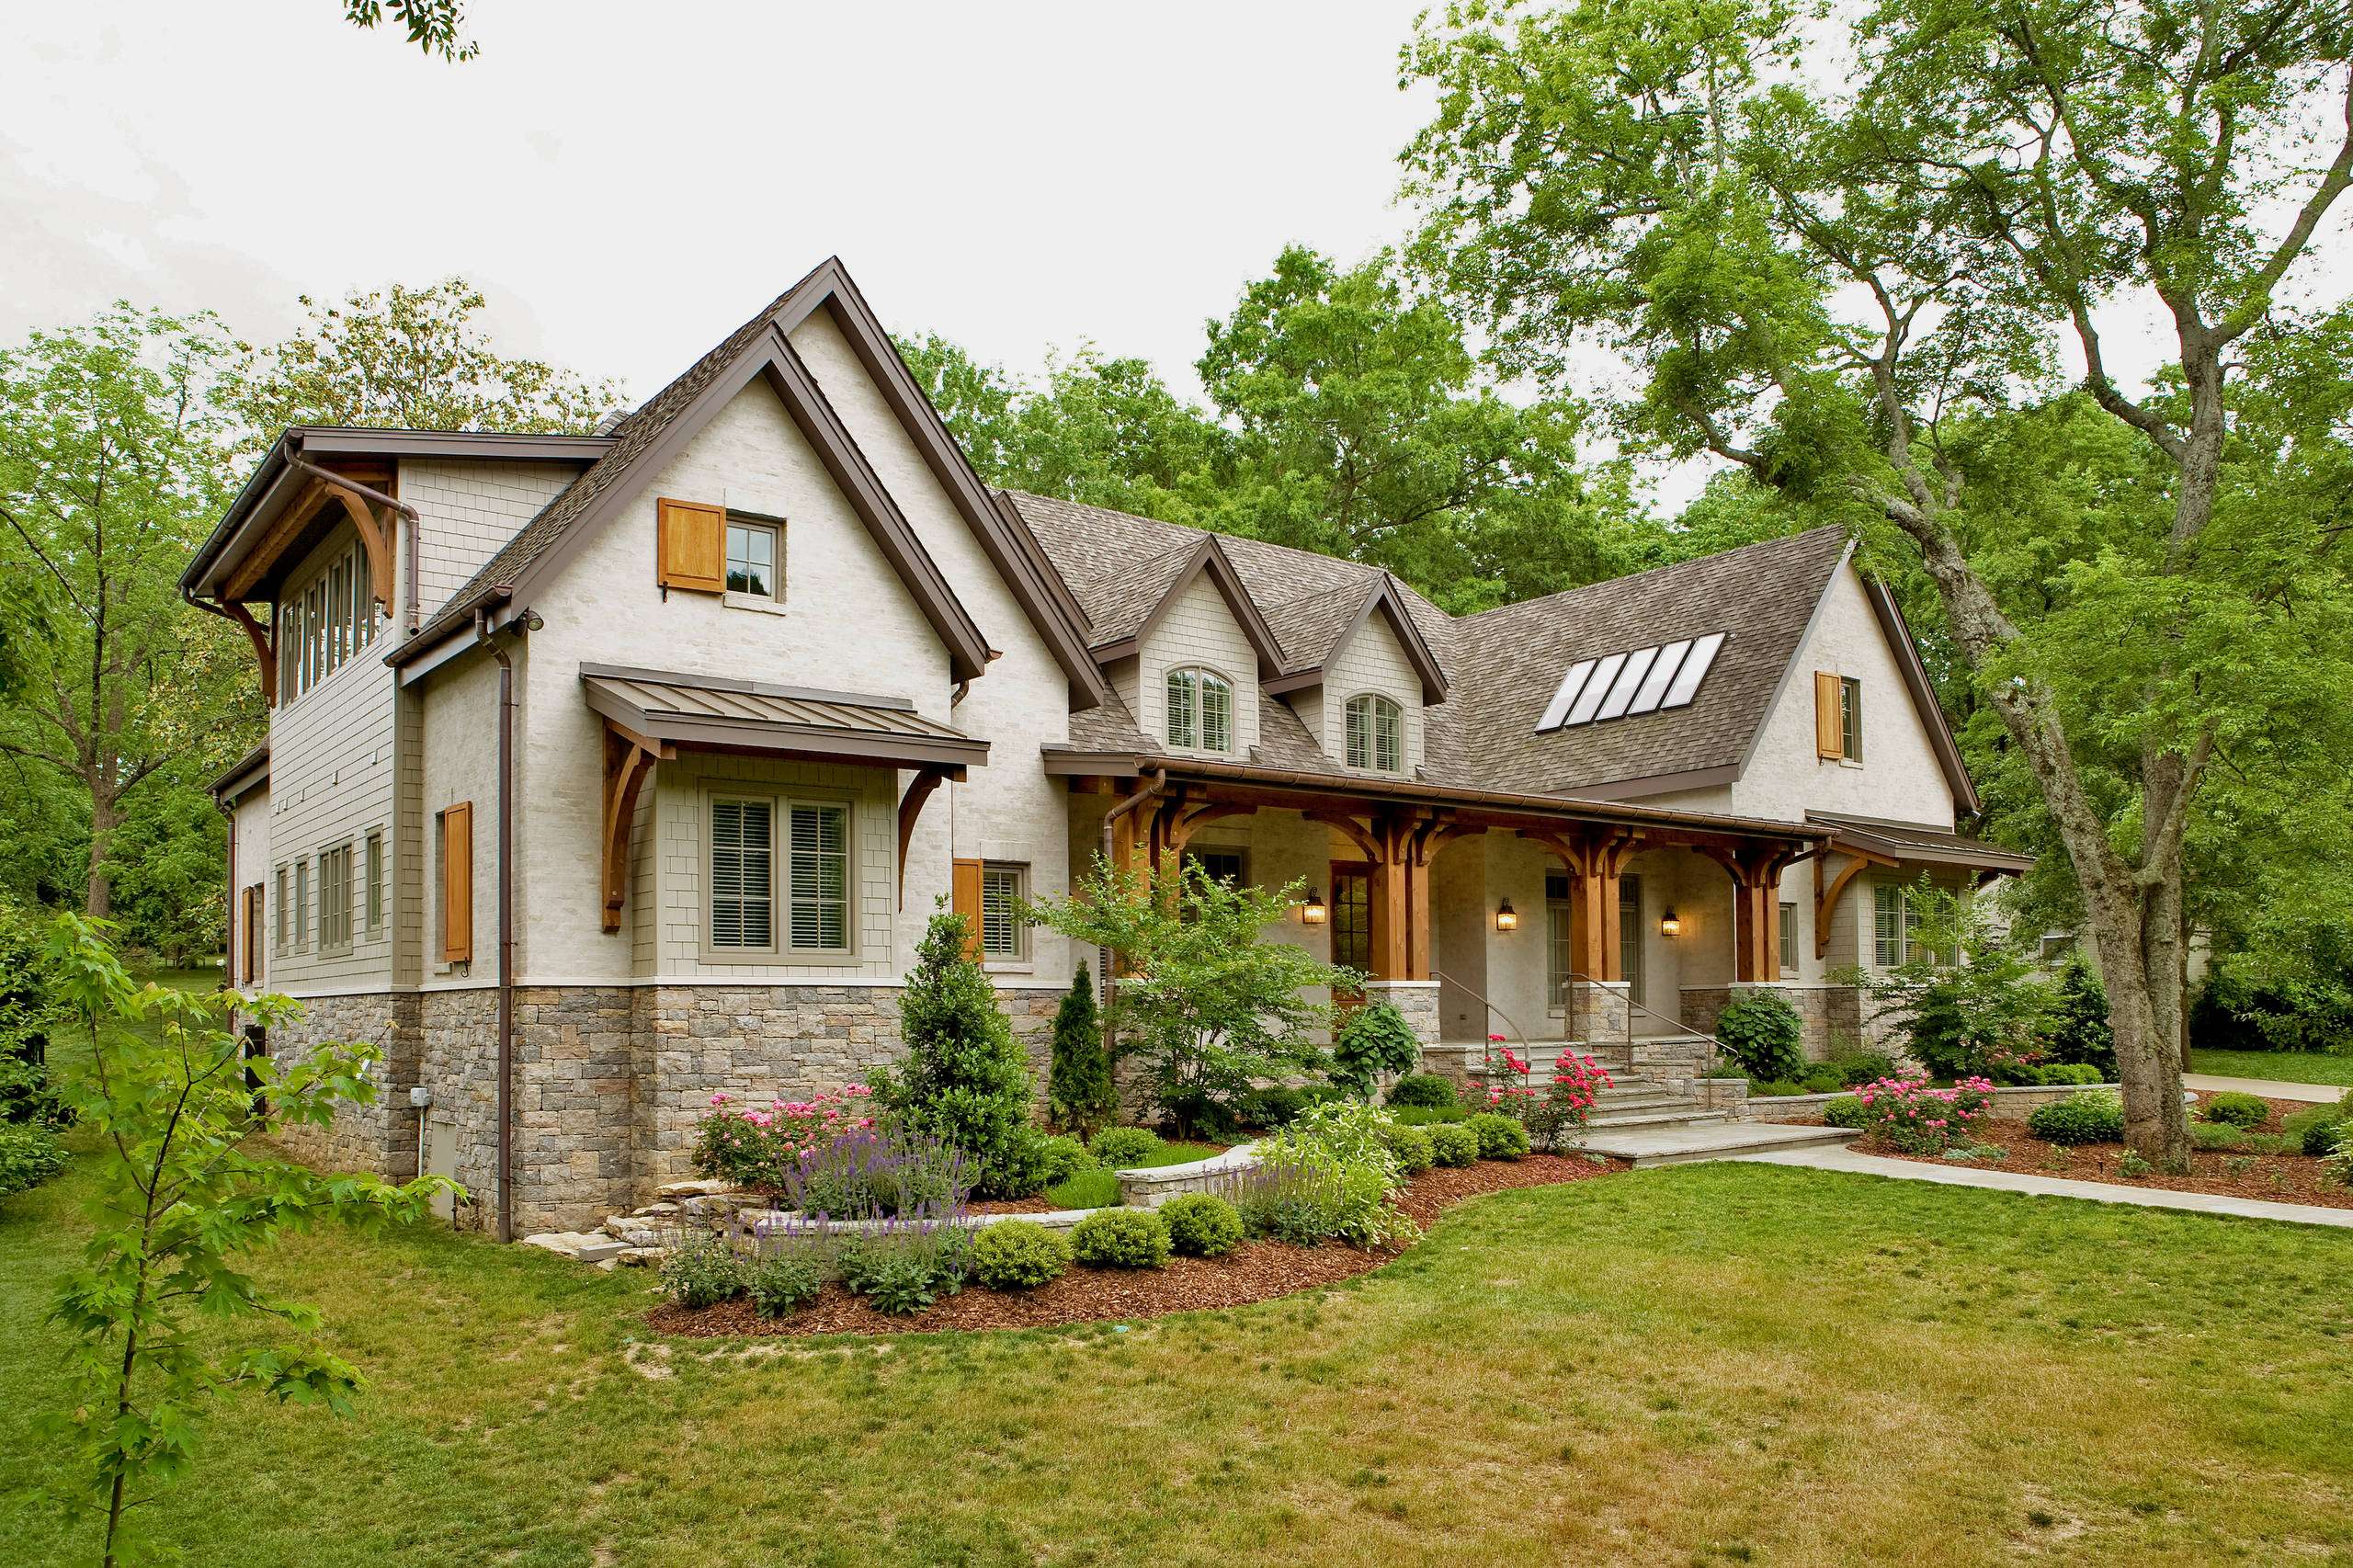 Stone Accents On Home Exterior